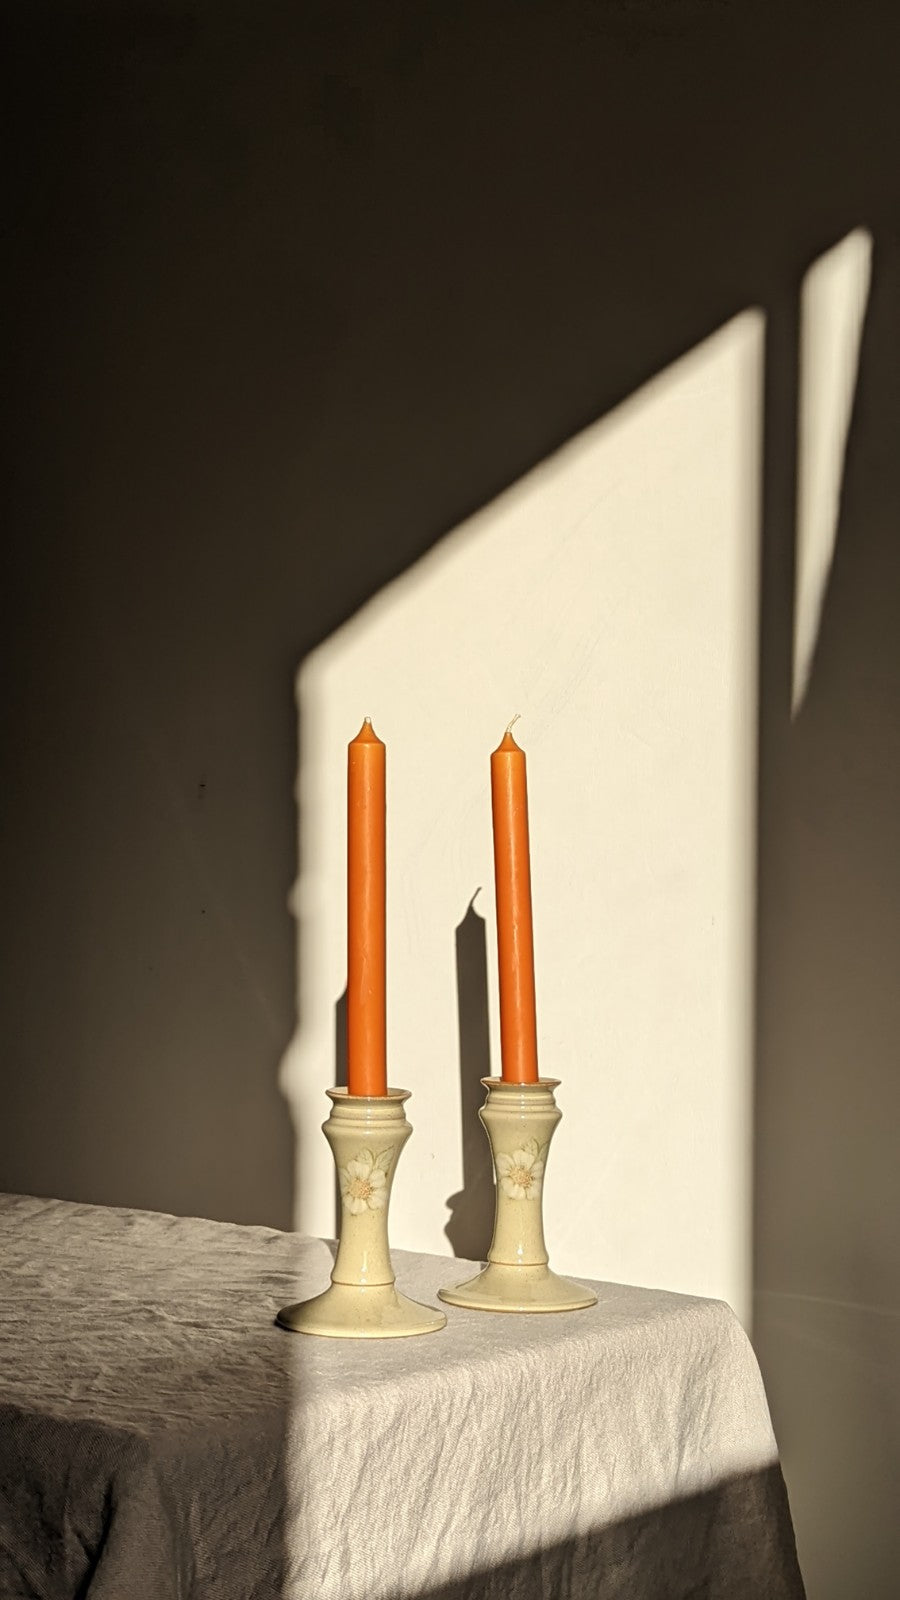 Pair of denbyshire candlestick holders